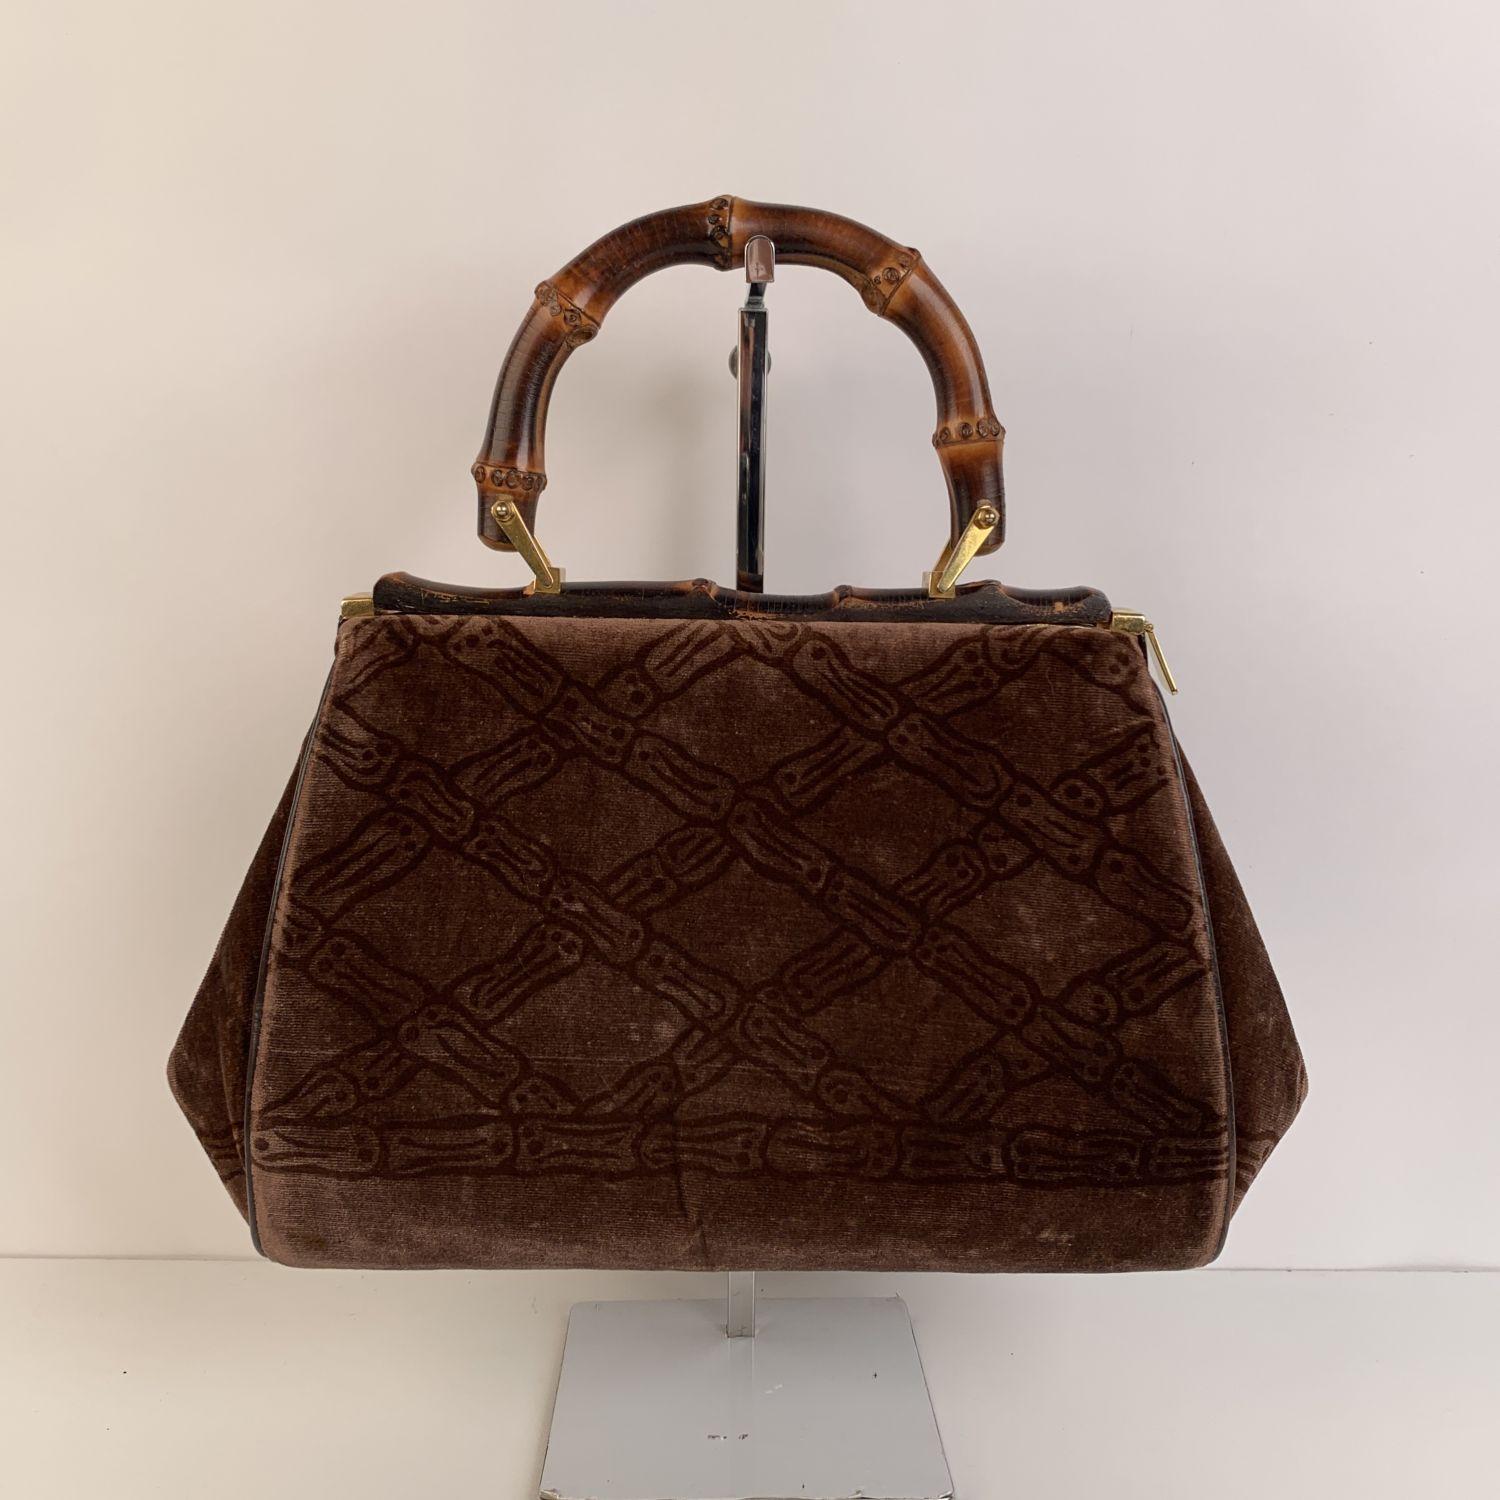 ROBERTA DI CAMERINO velvet handbag. Classic style in brown velvet with bamboo frame and handle. Gold metal hardware. It features side pull-lock closure. Leather lining. 1 side pocket and 2 side zip pockets inside. 'Made in Italy by Roberta Di